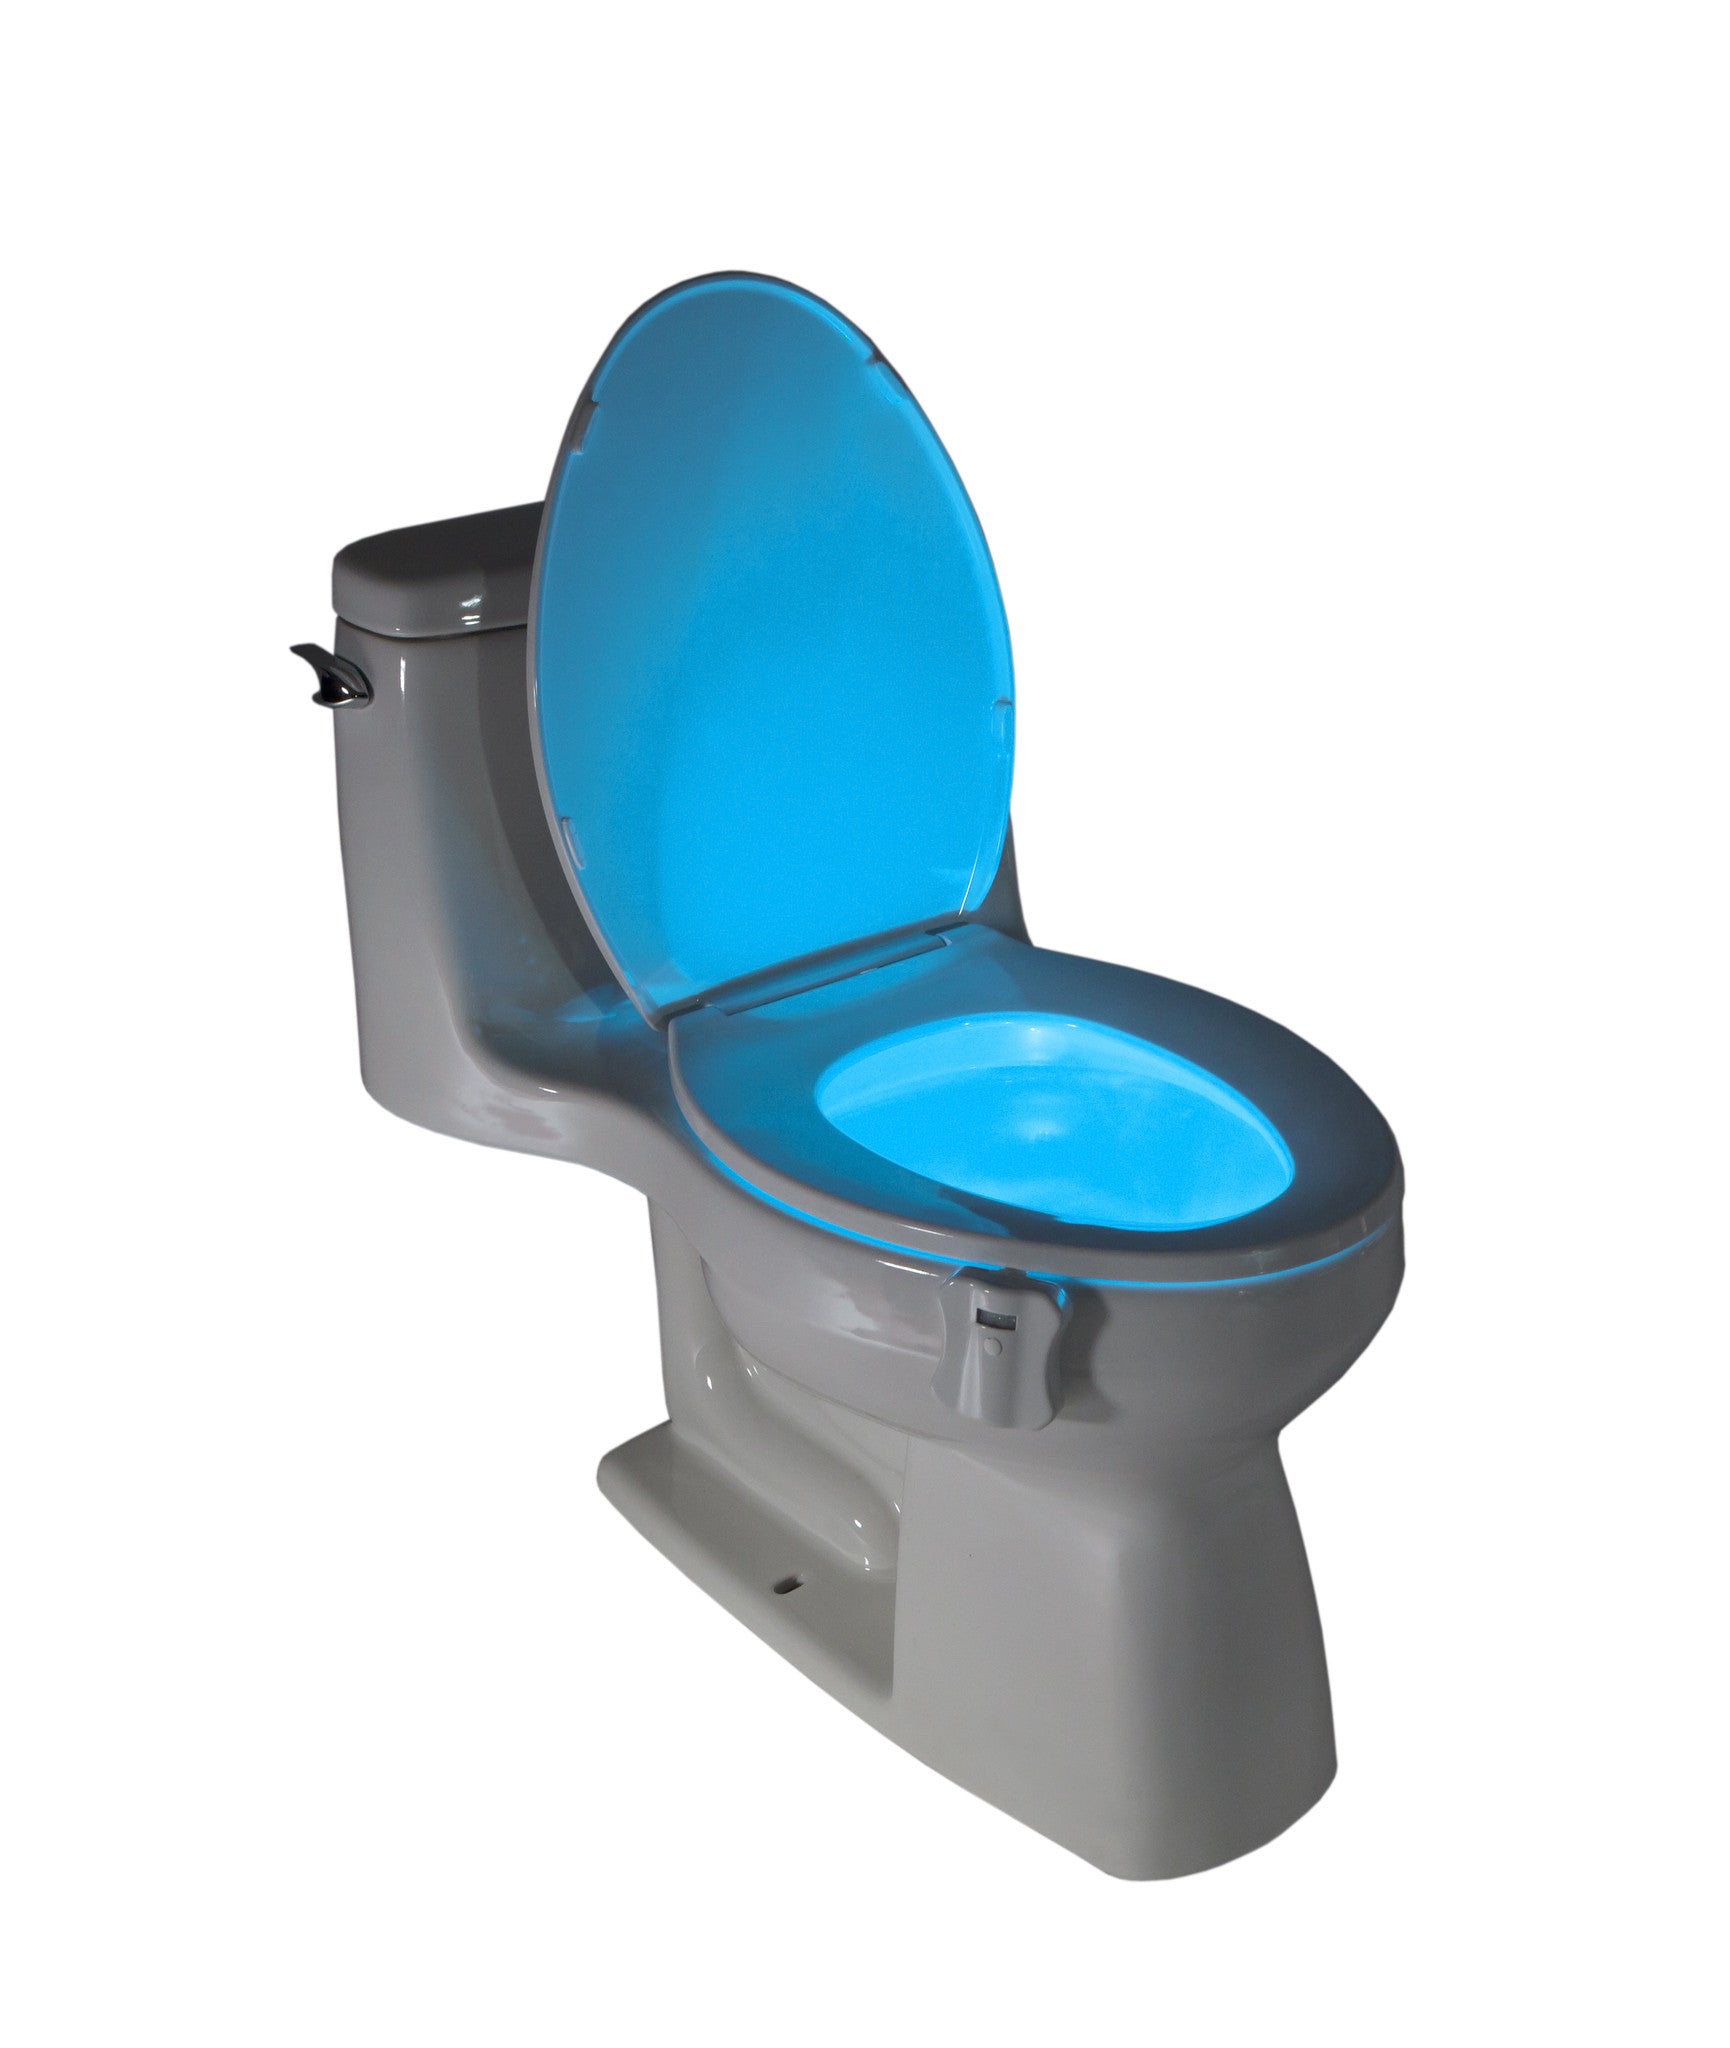 GlowBowl Fresh 3-Pack - Motion Activated Toilet Nightlight with Air Fr